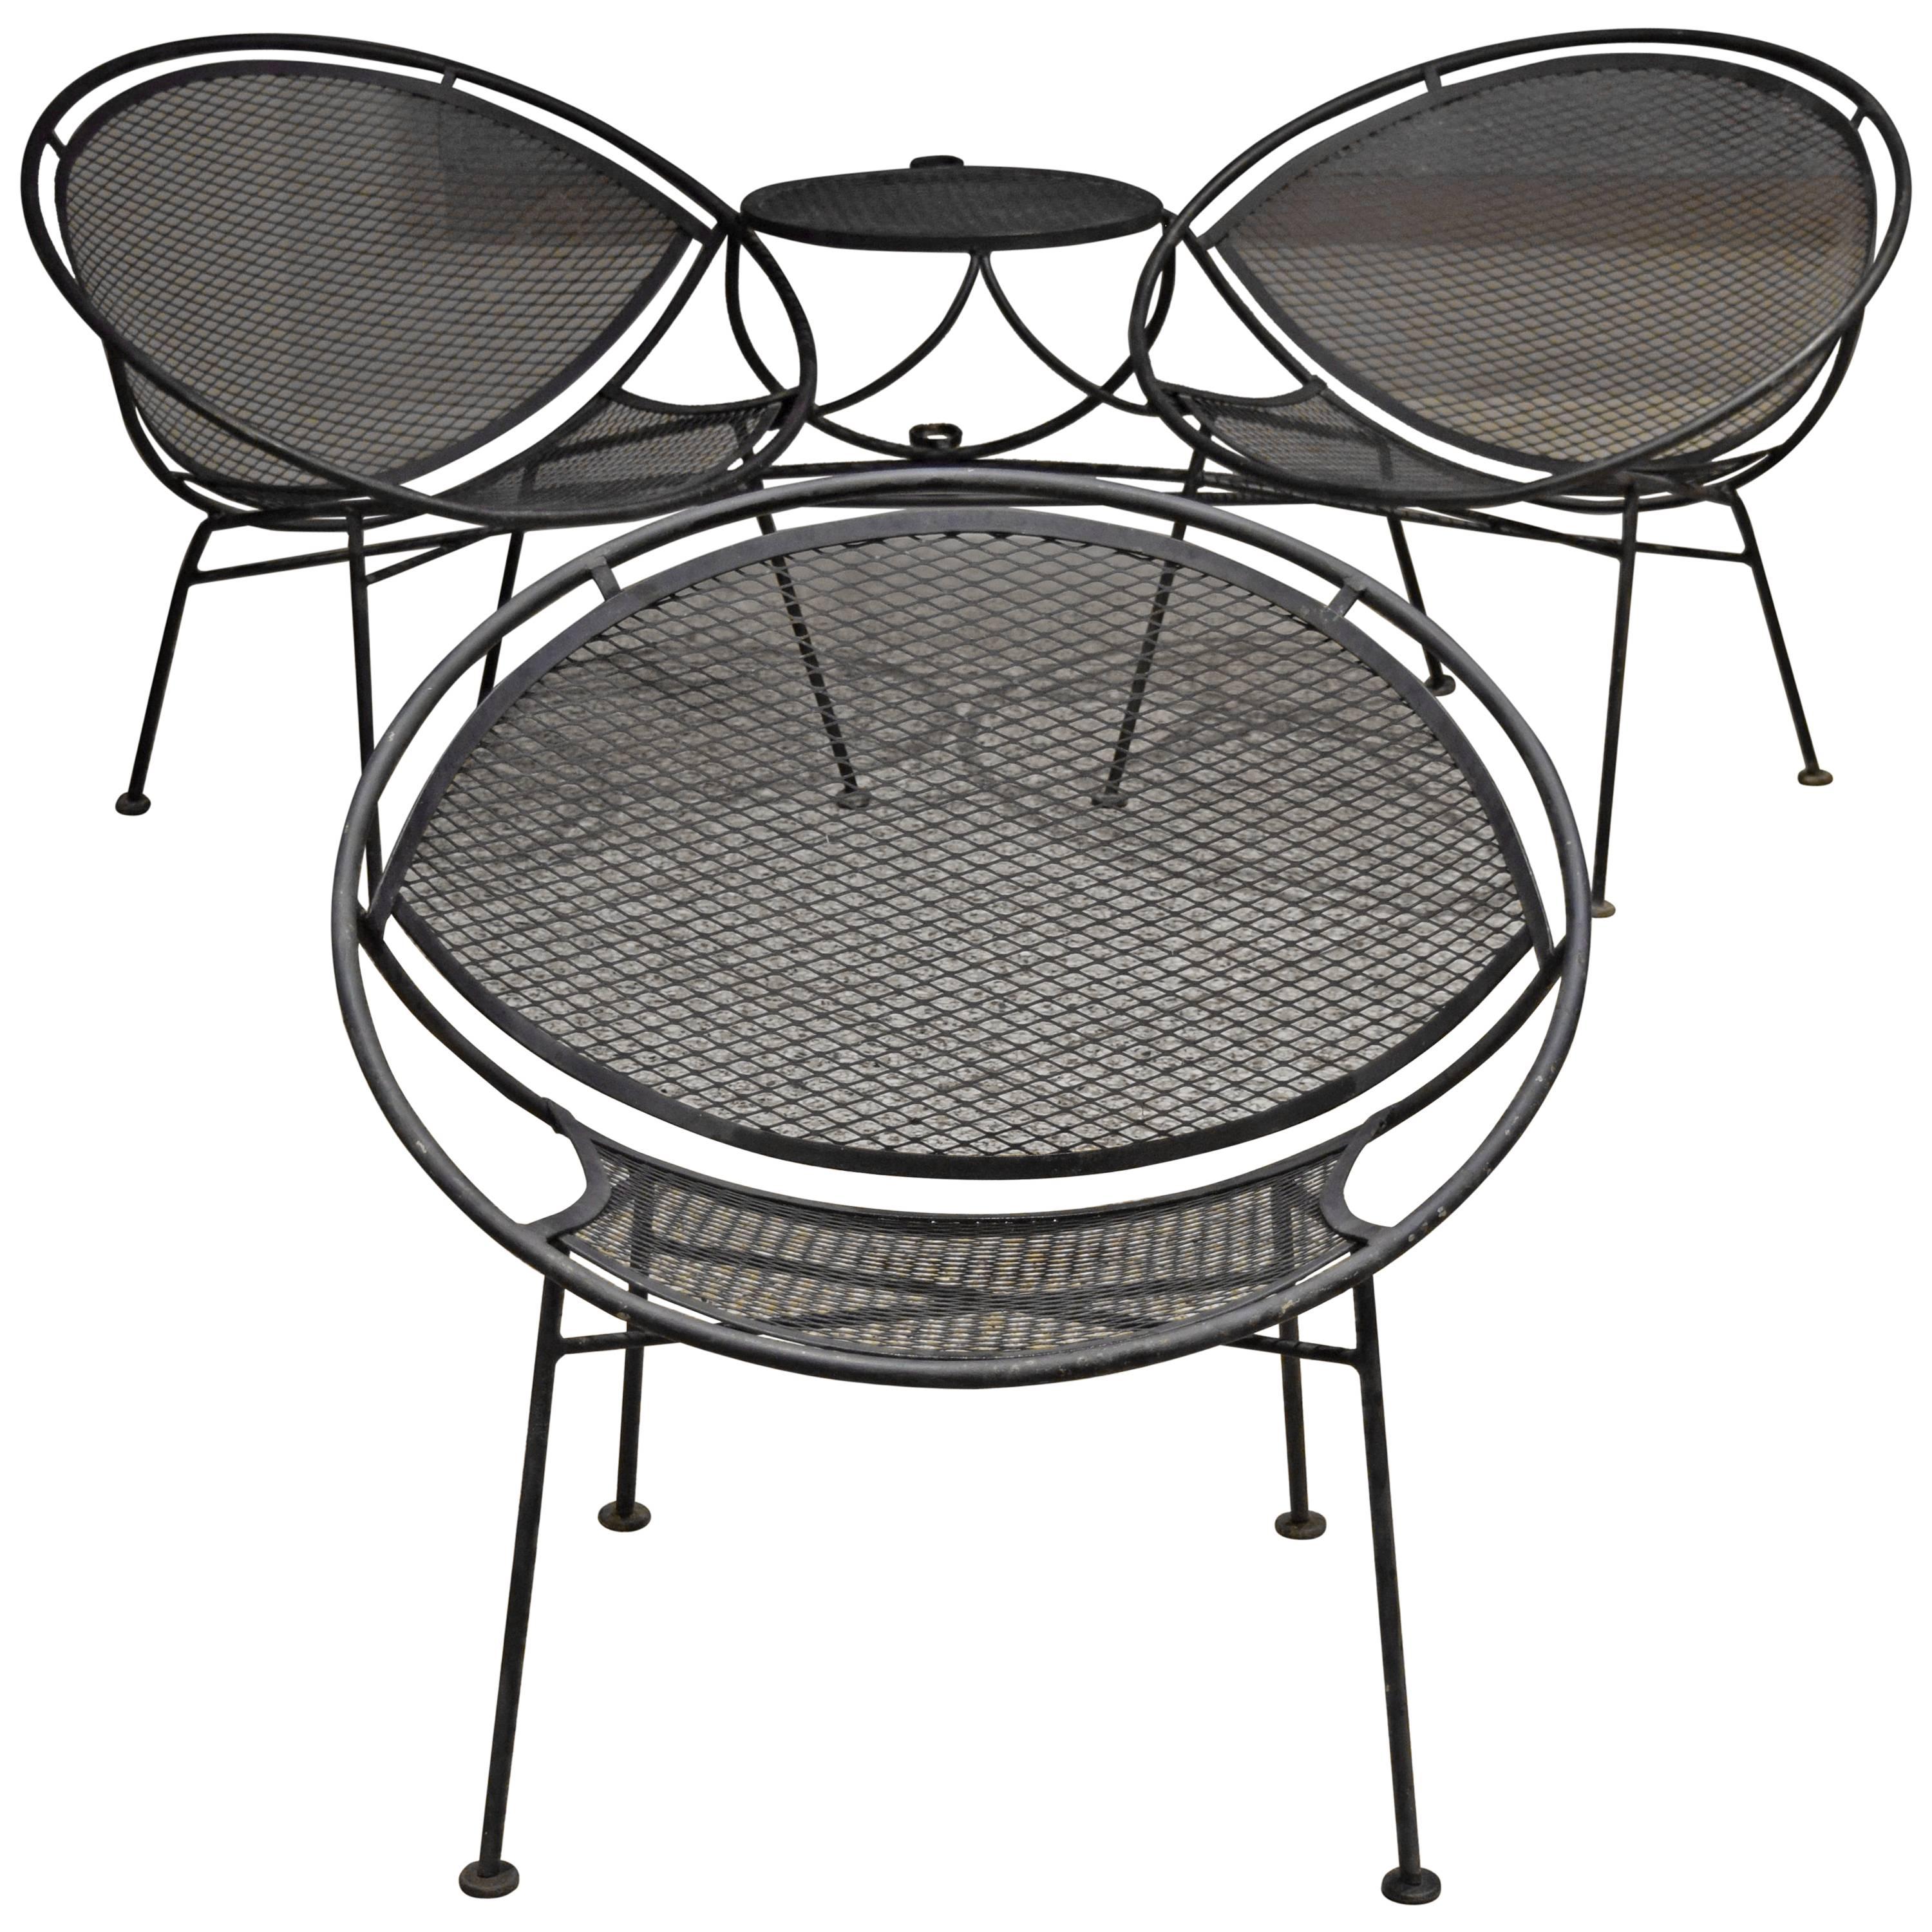 Wrought iron patio set by Maurizio Tempestini for Salterini. Includes tête-à-tête and single lounge chair.